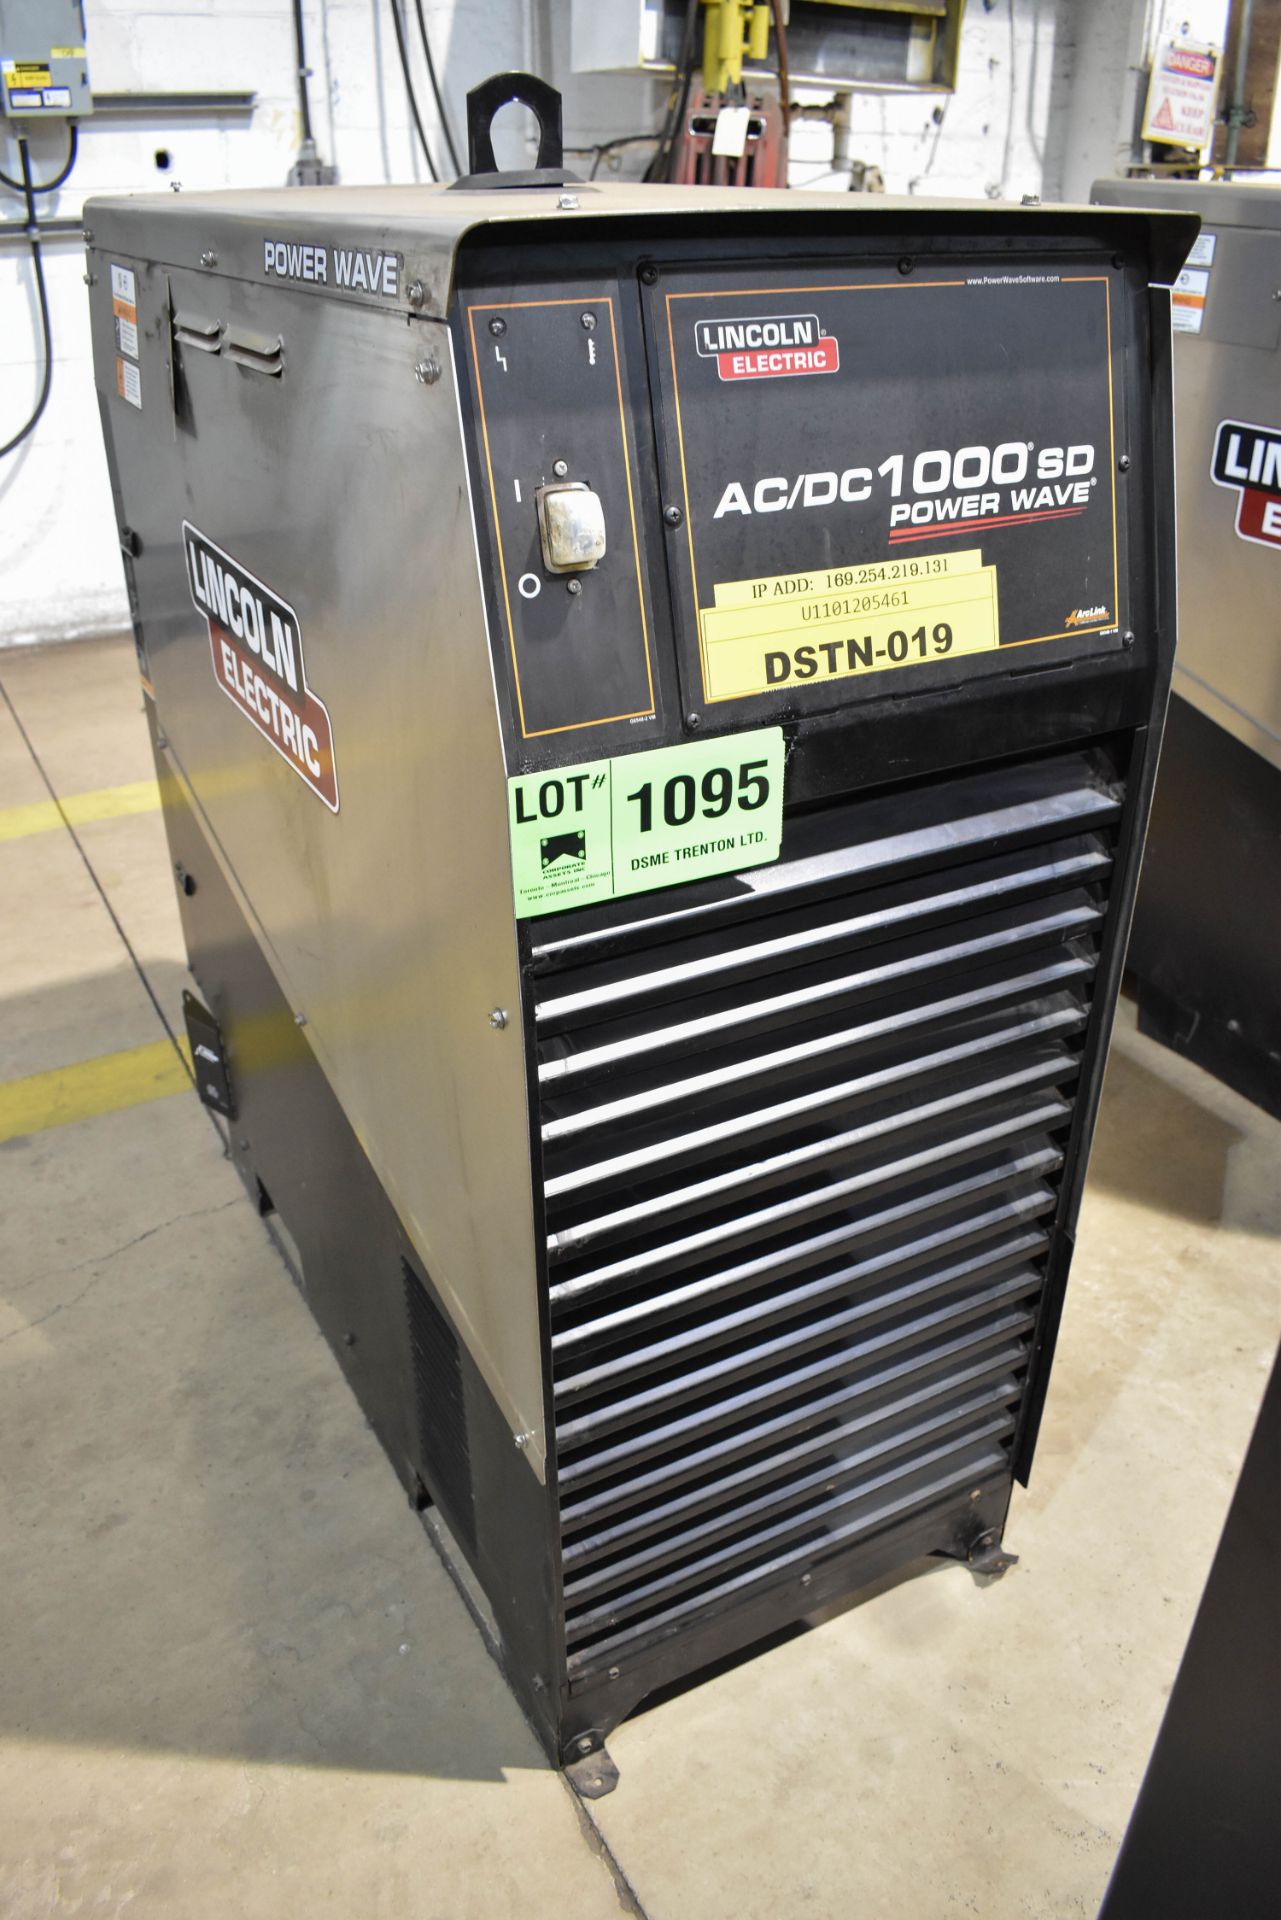 LINCOLN ELECTRIC AC/DC1000SD POWER WAVE WELDING POWER SOURCE (CI) [RIGGING FEE FOR LOT# 1095 - $